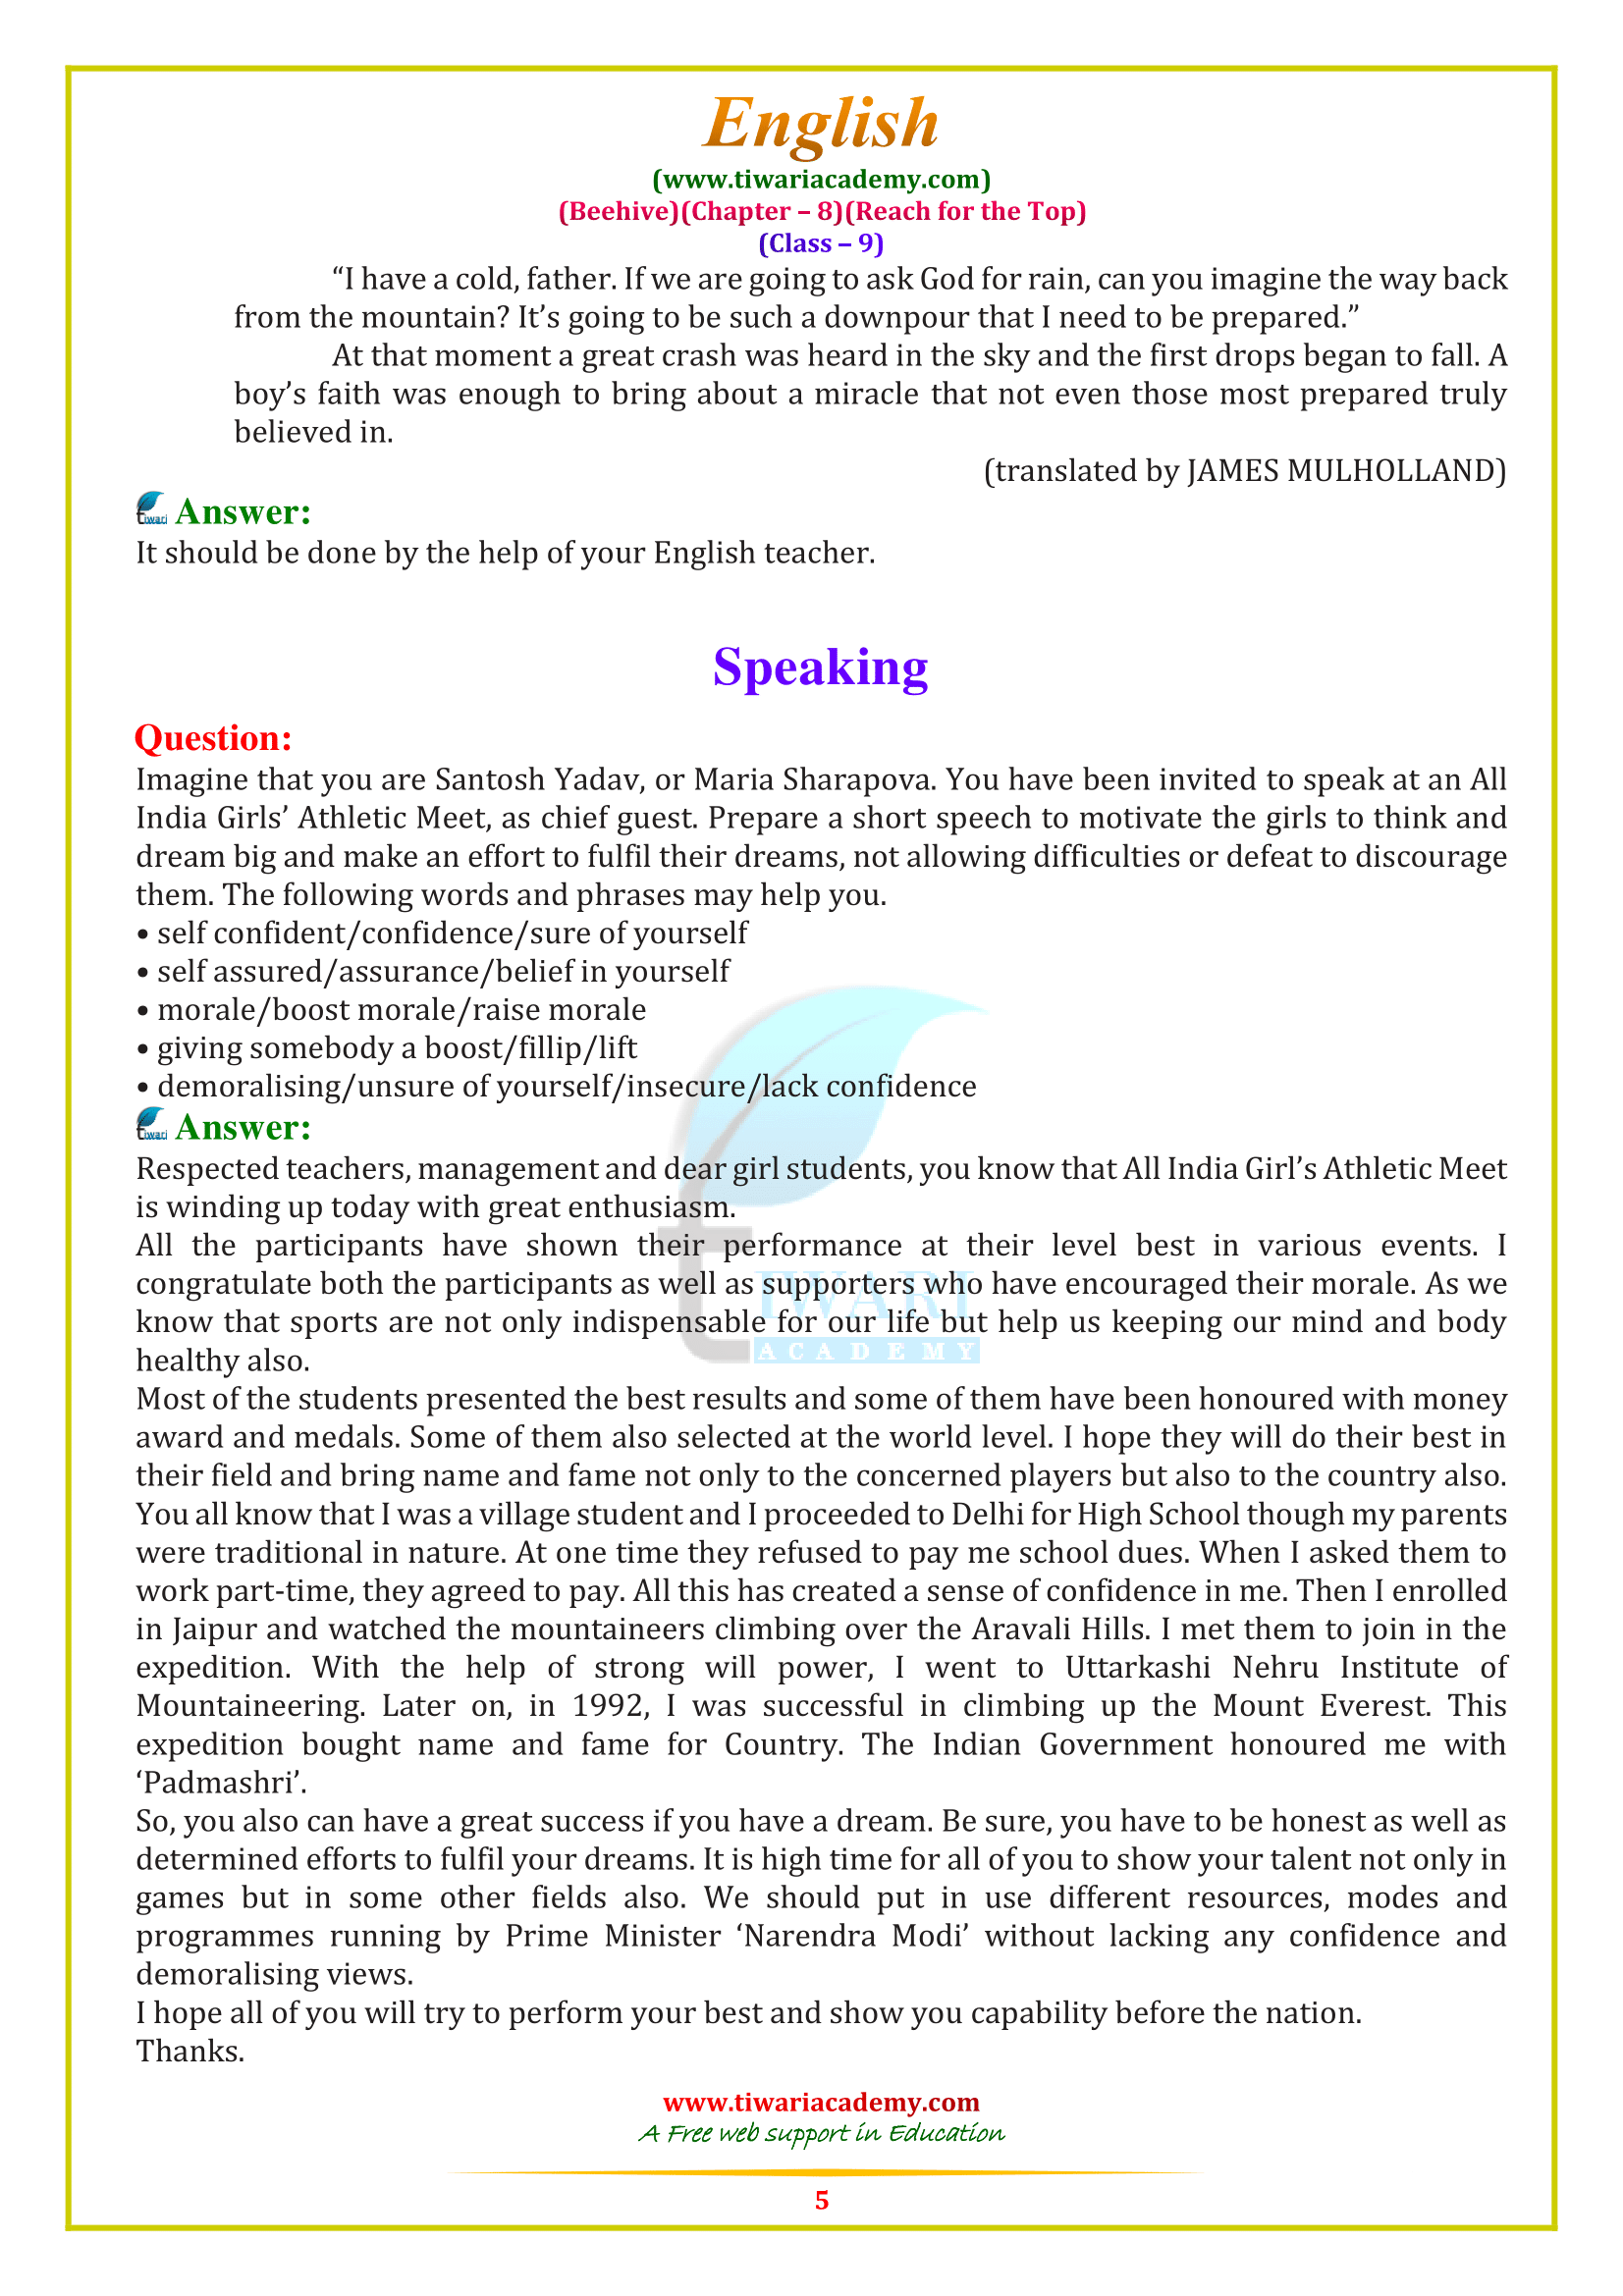 Class 9 Beehive english chapter 8